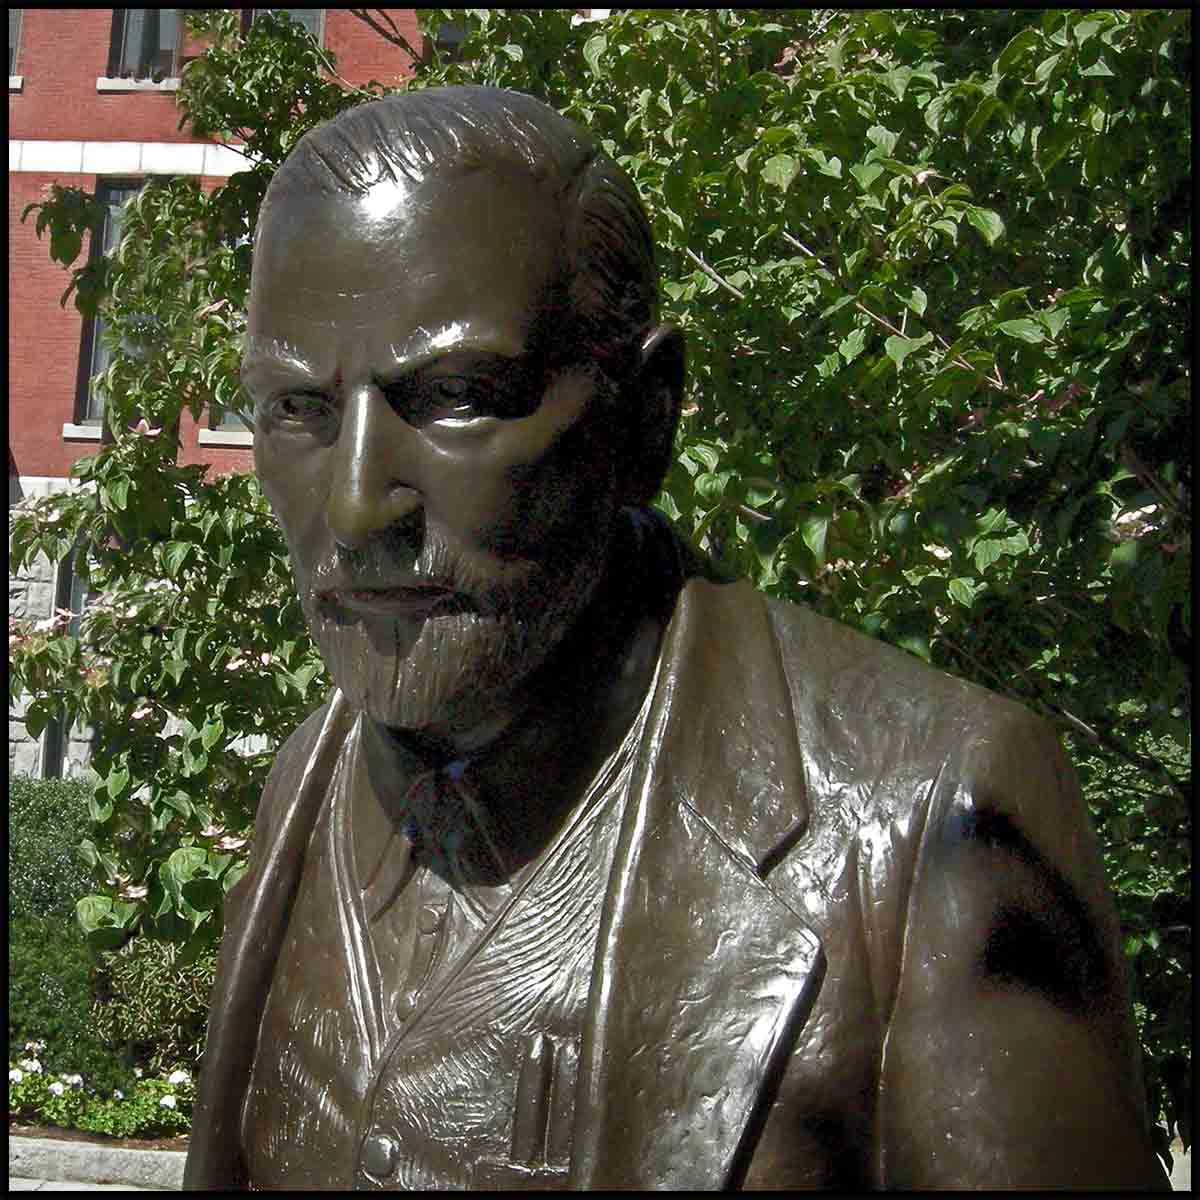 photo closeup of face of bronze sculpture of Sigmund Freud sitting on a stone bench in a plaza with trees behind